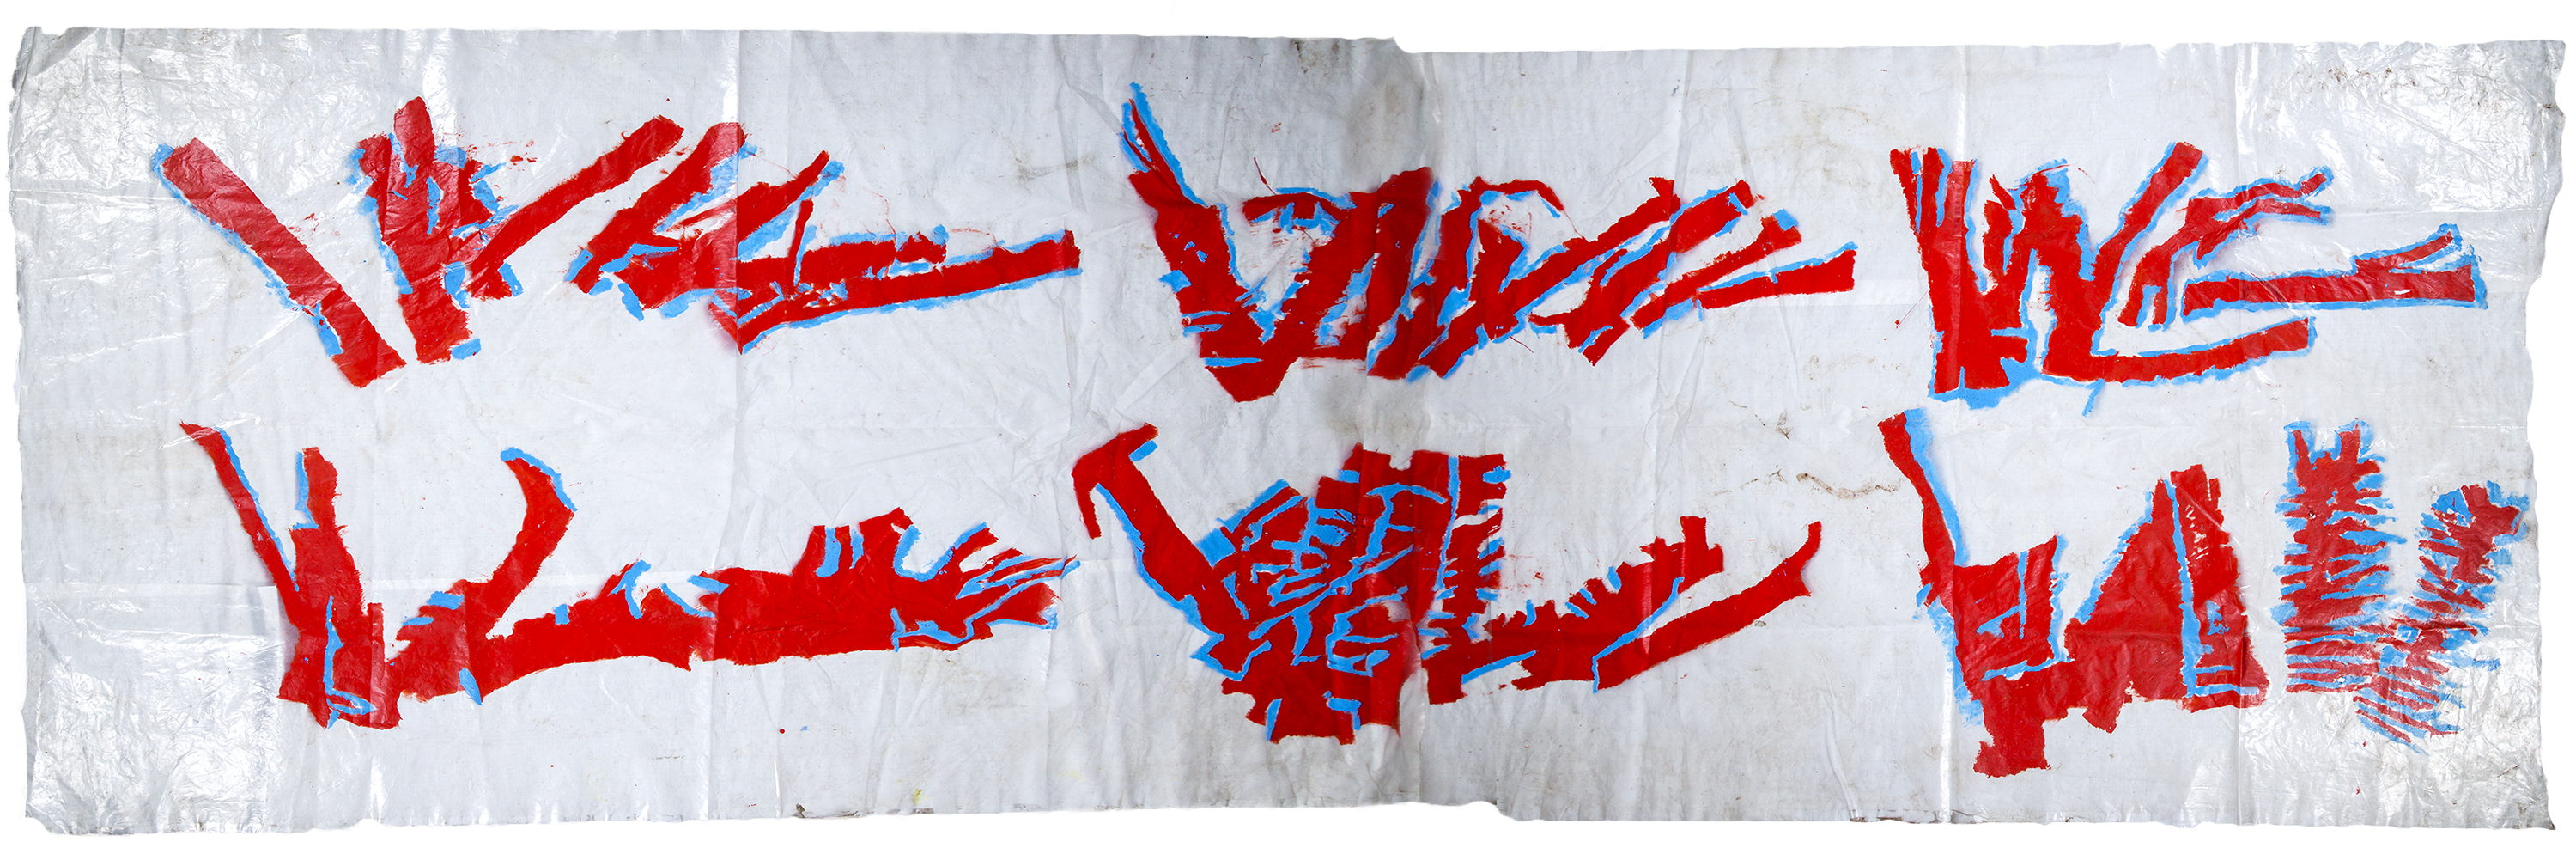 A long, thin painting with red and blue abstract, geometric brushstrokes on white plastic